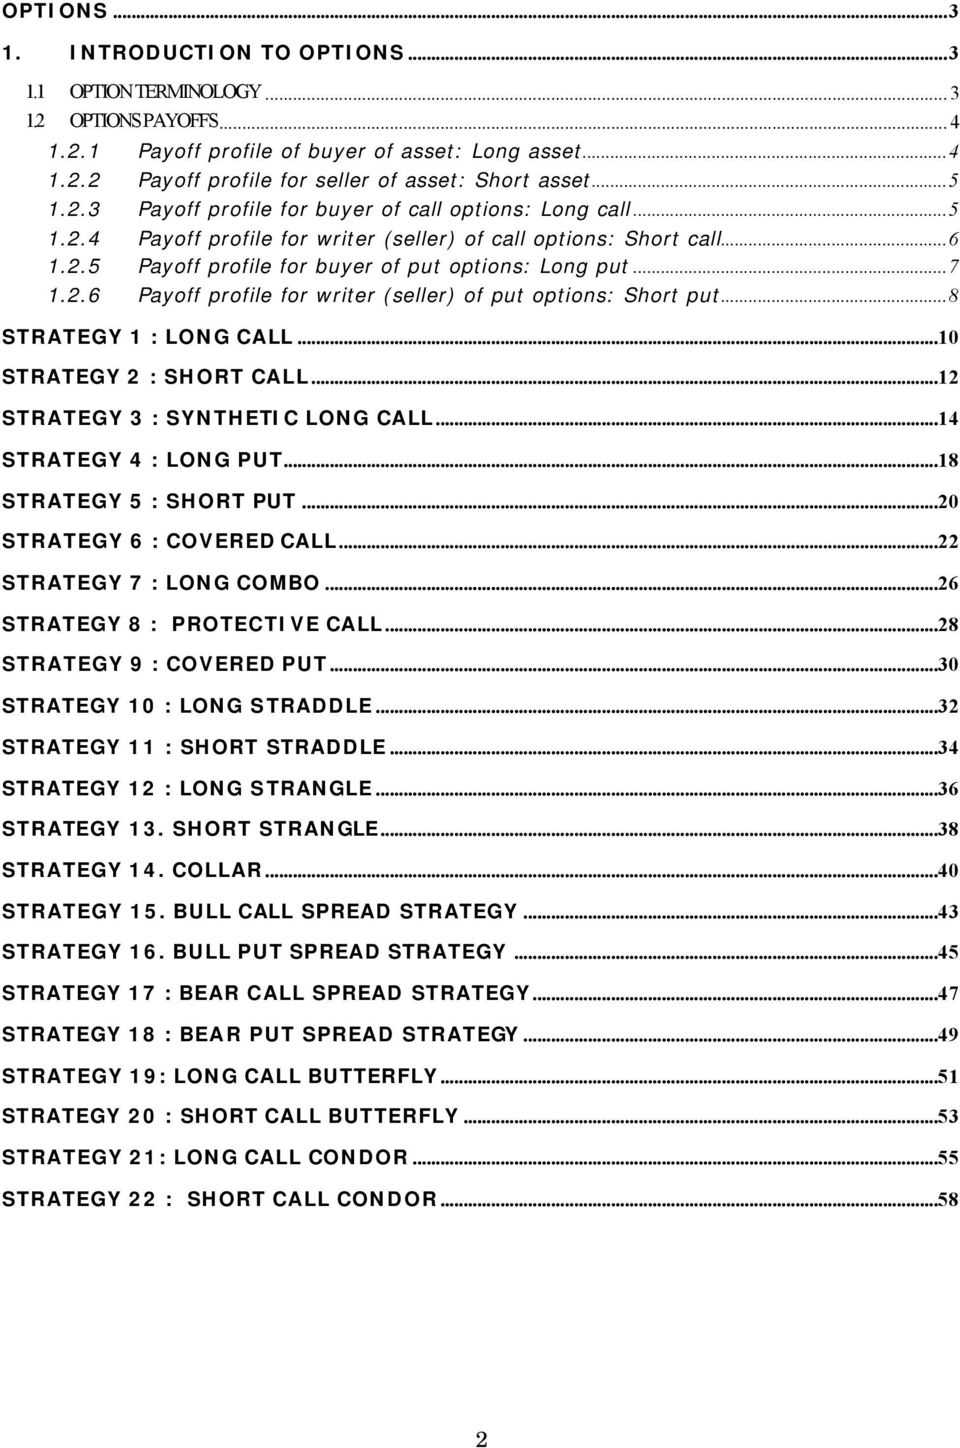 2.6 Payoff profile for writer (seller) of put options: Short put...8 STRATEGY 1 : LONG CALL...10 STRATEGY 2 : SHORT CALL...12 STRATEGY 3 : SYNTHETIC LONG CALL...14 STRATEGY 4 : LONG PUT.